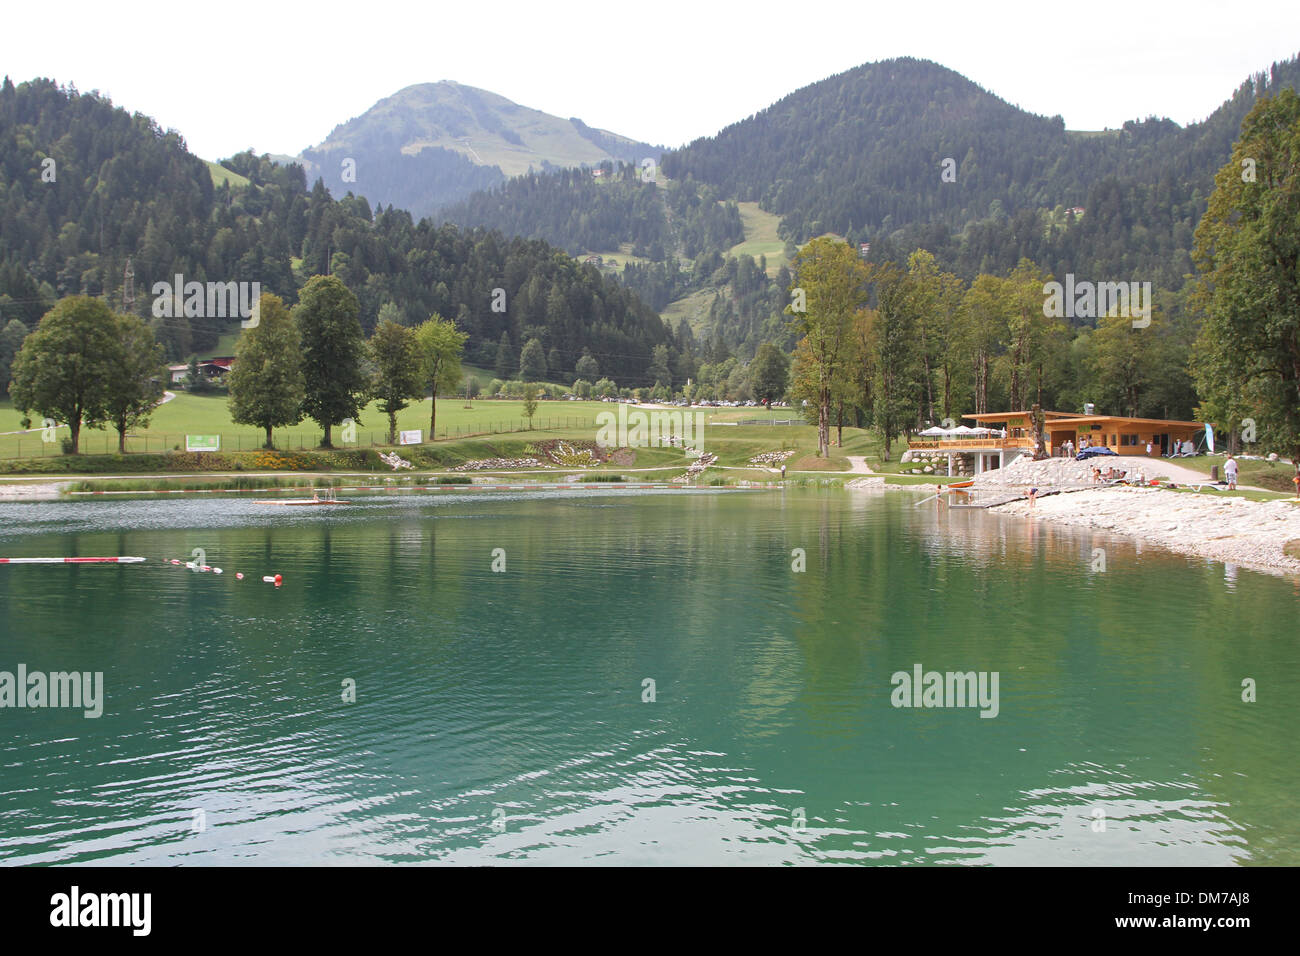 Ahornsee Lake in Soll, Austria Stock Photo